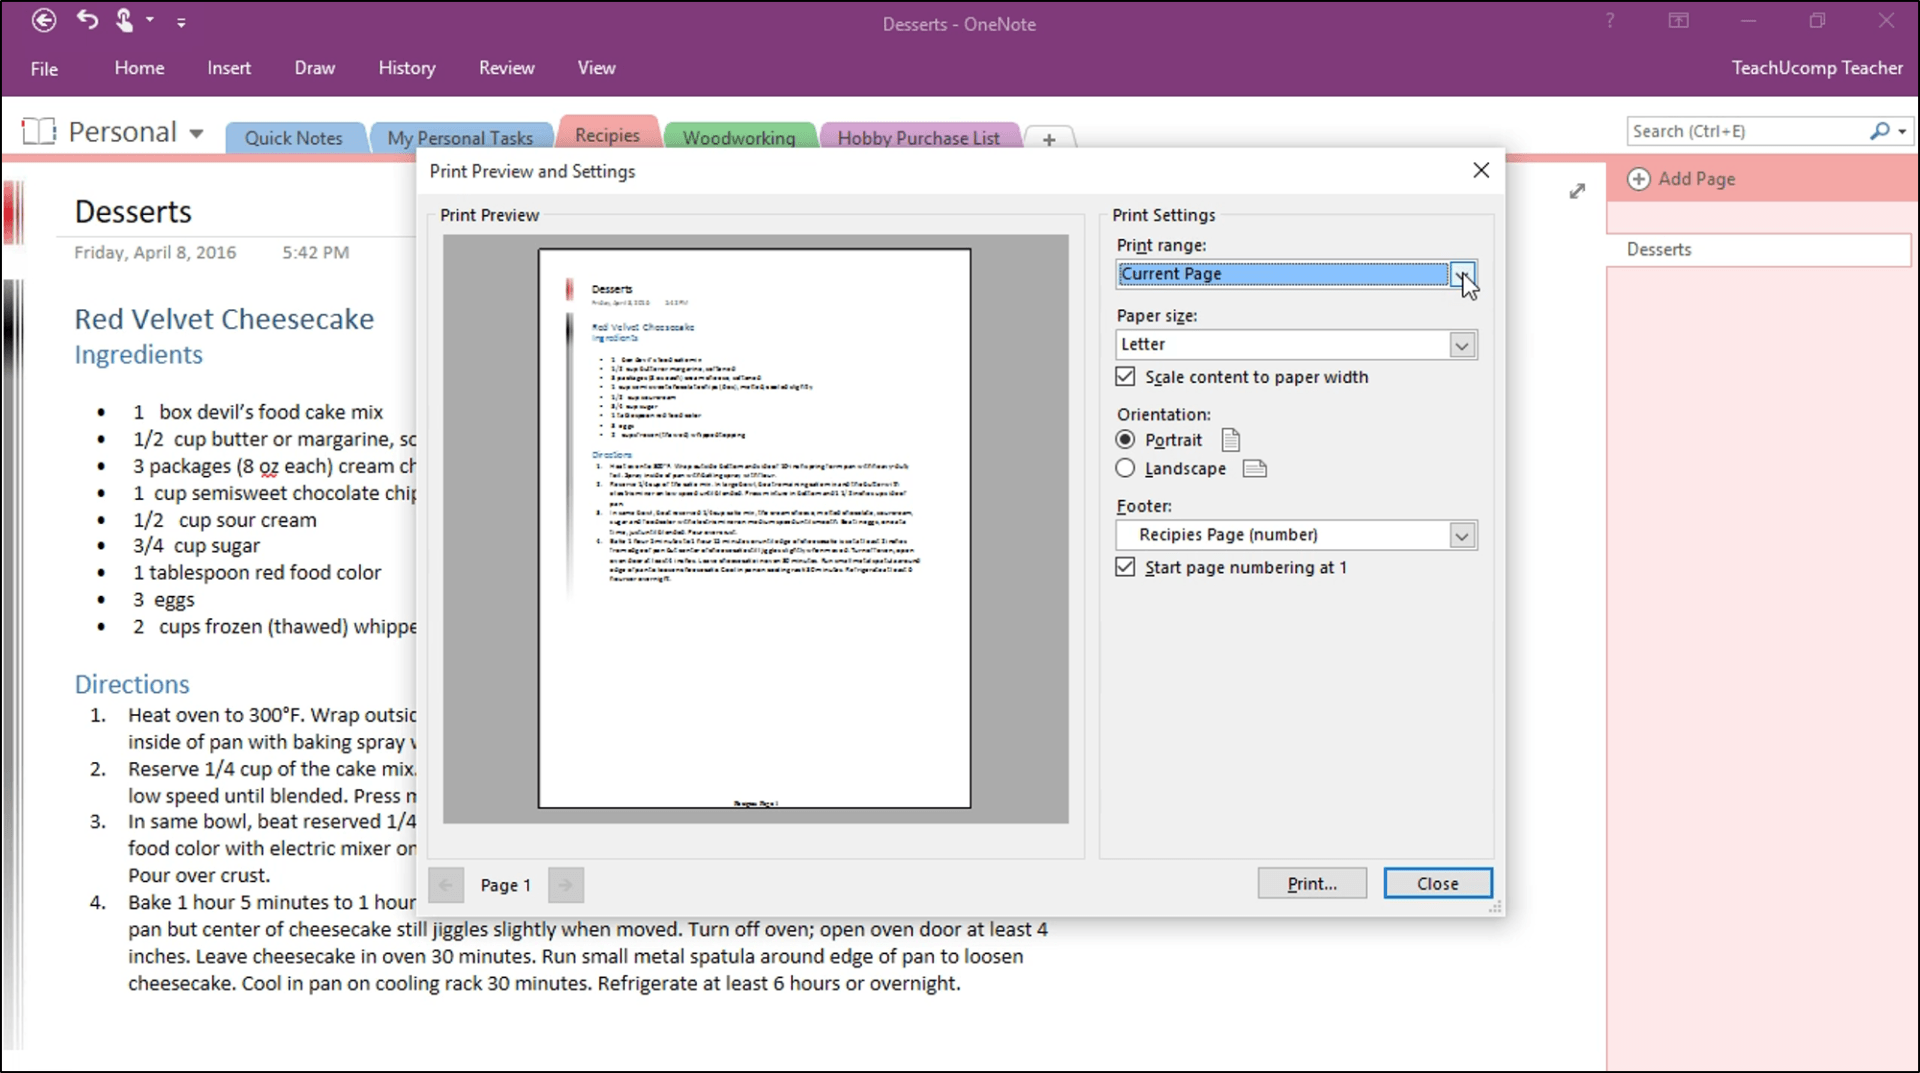 using onenote in teams